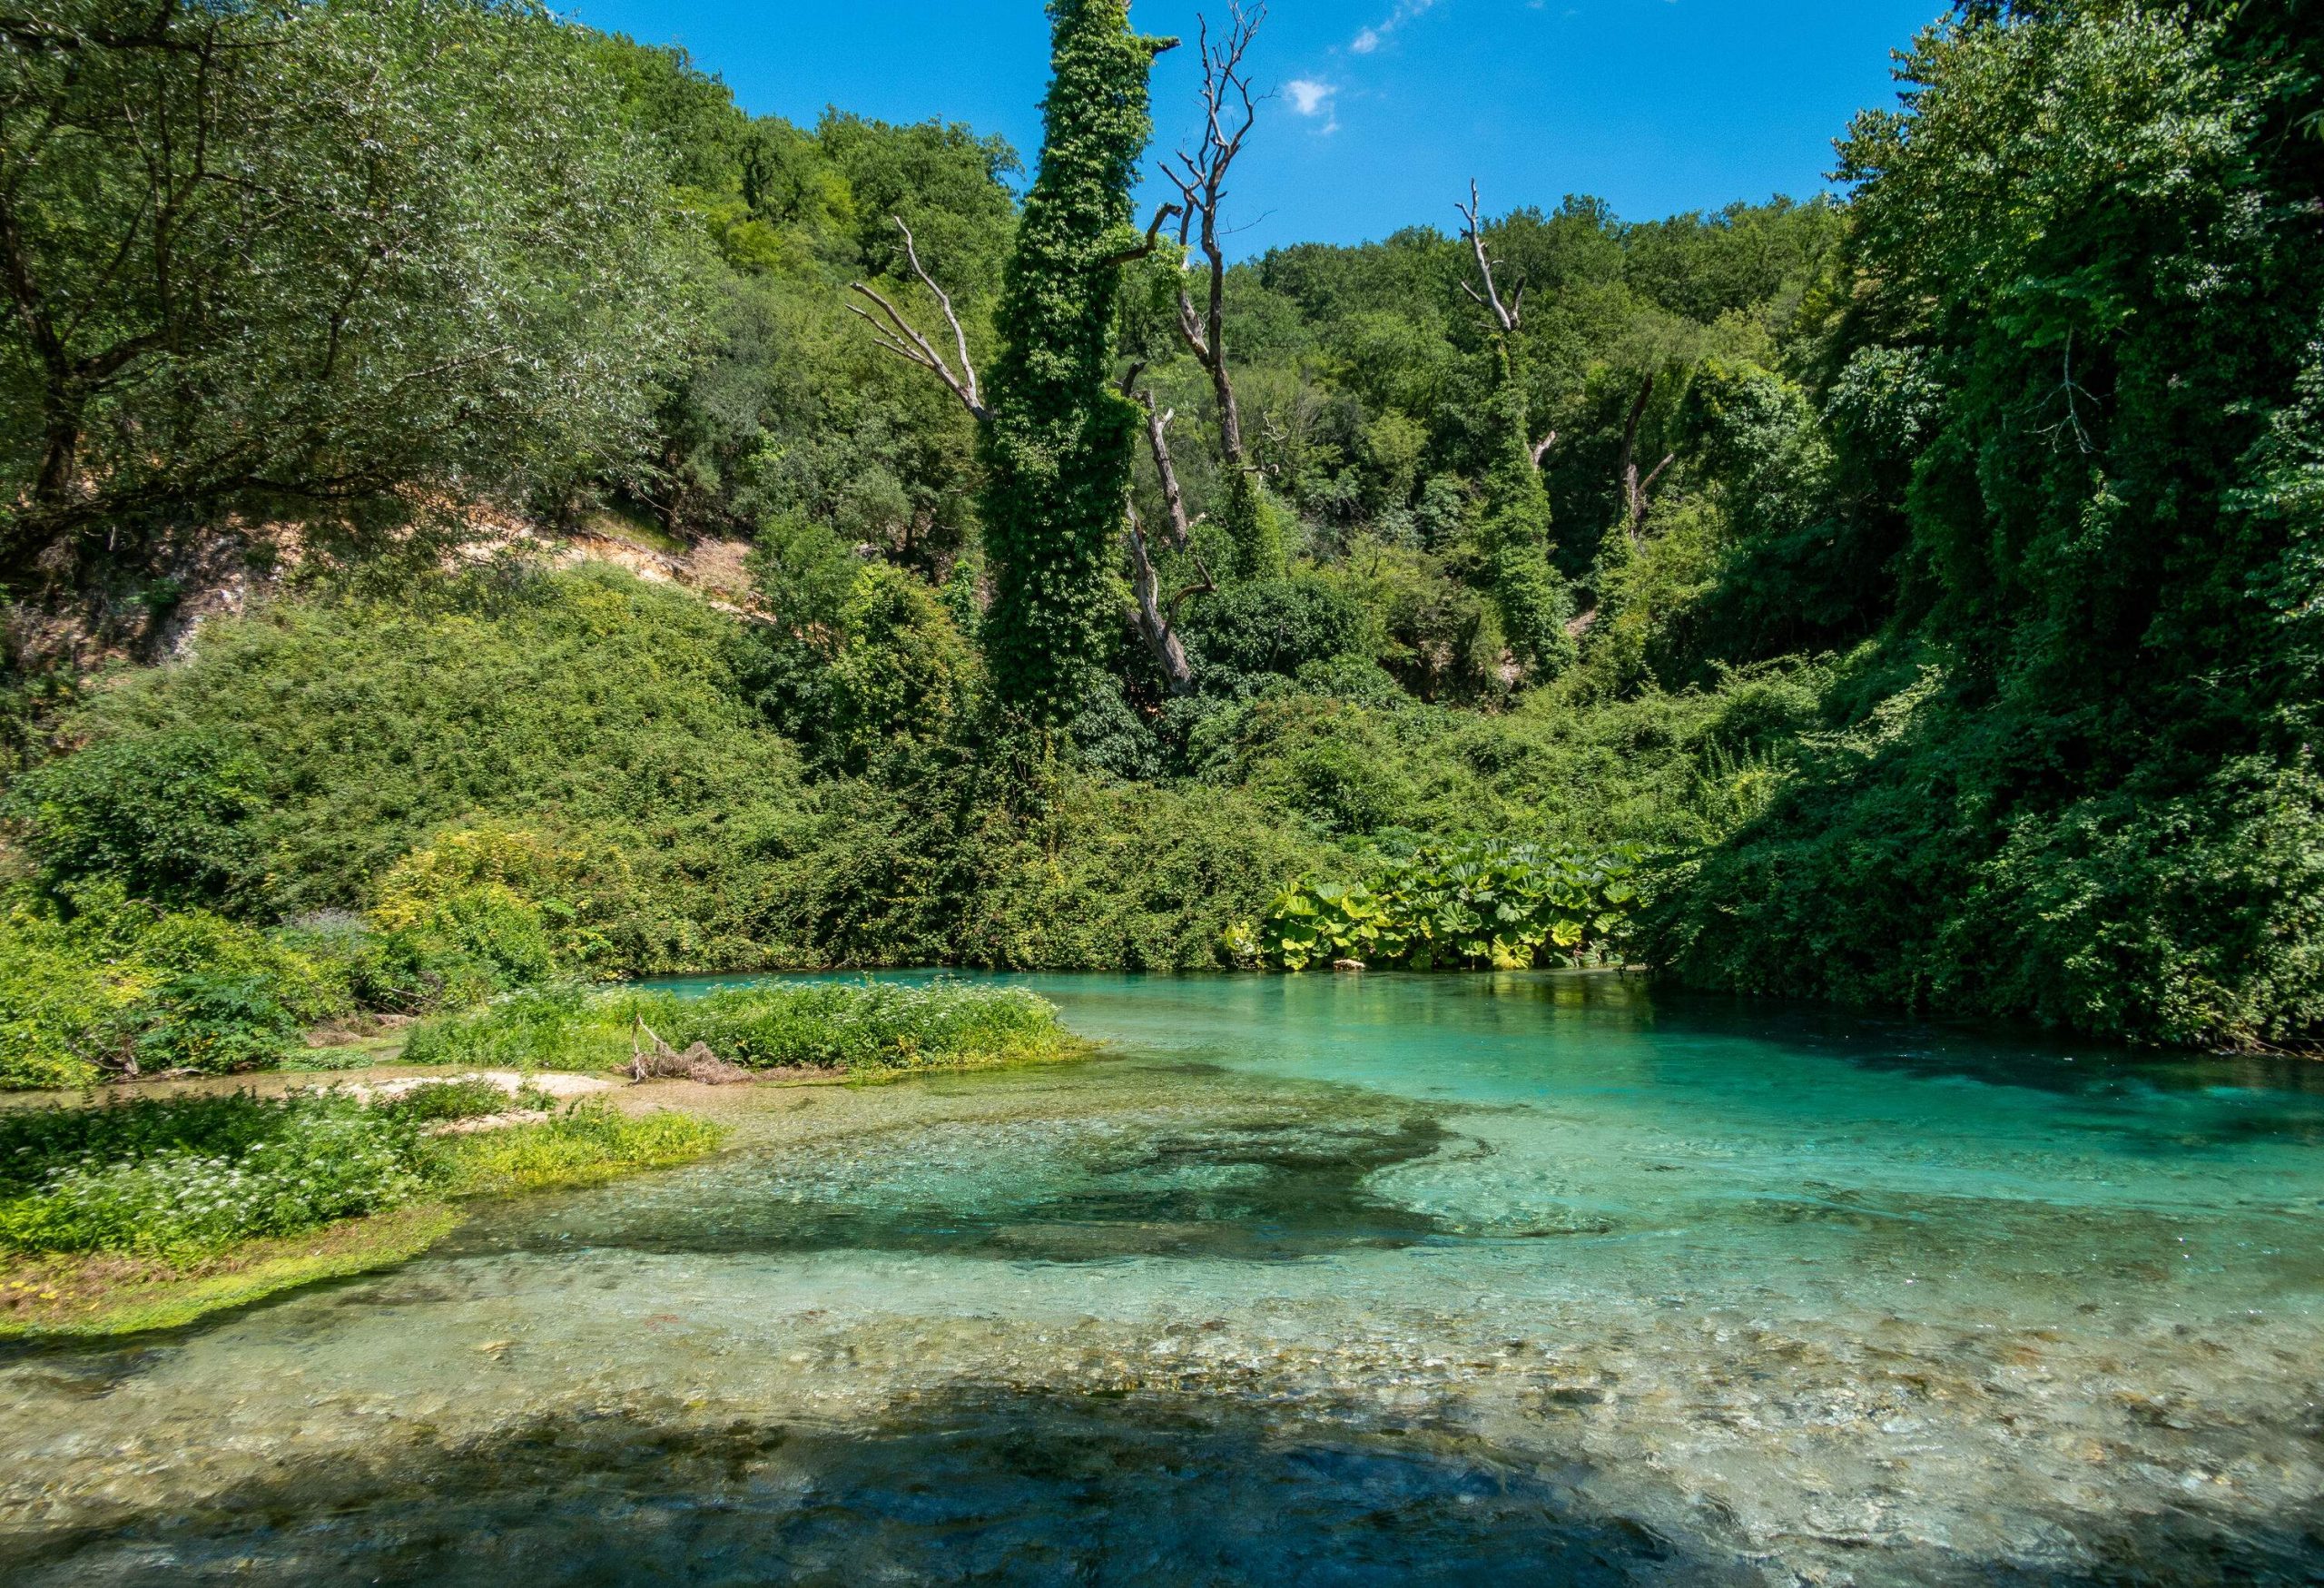 A spring with light blue crystal clear water flowing in the middle of a lush forested mountain.